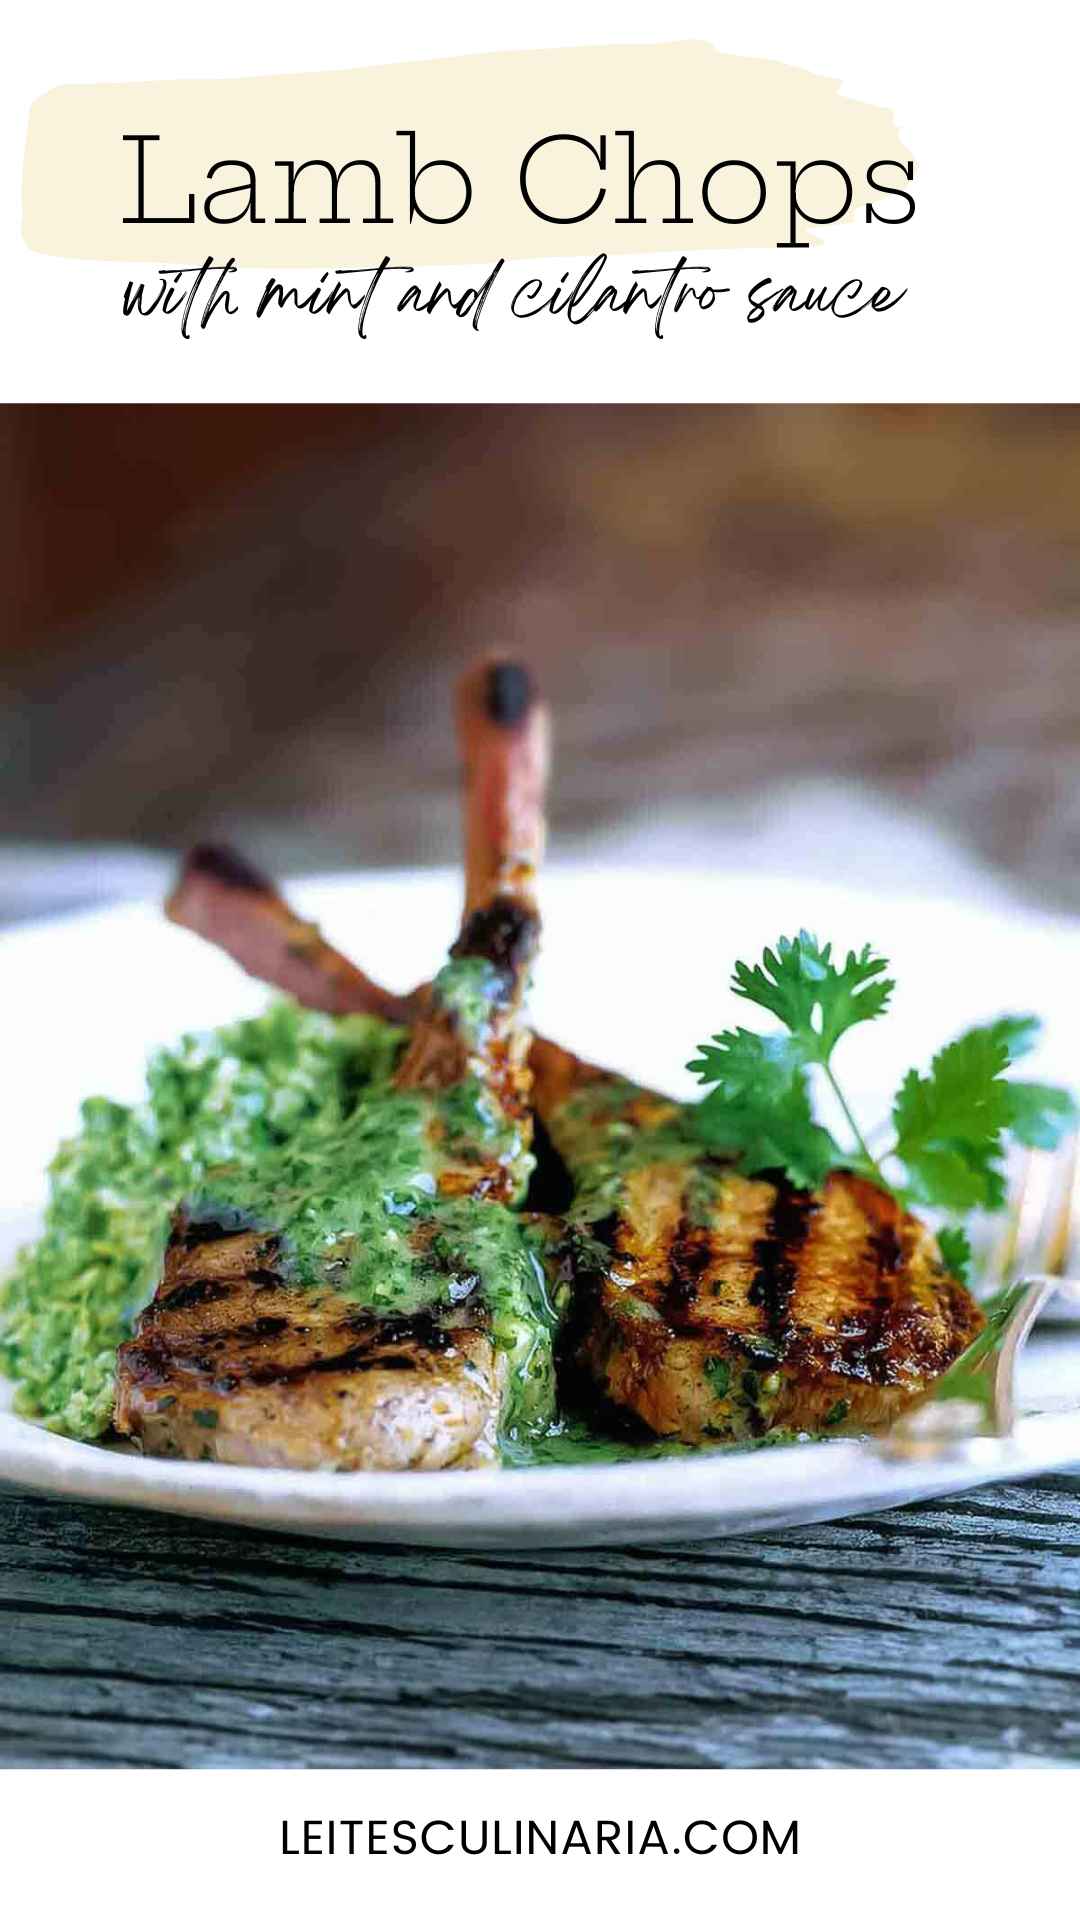 Two grilled lamb chops topped with cilantro-mint sauce on a white plate.